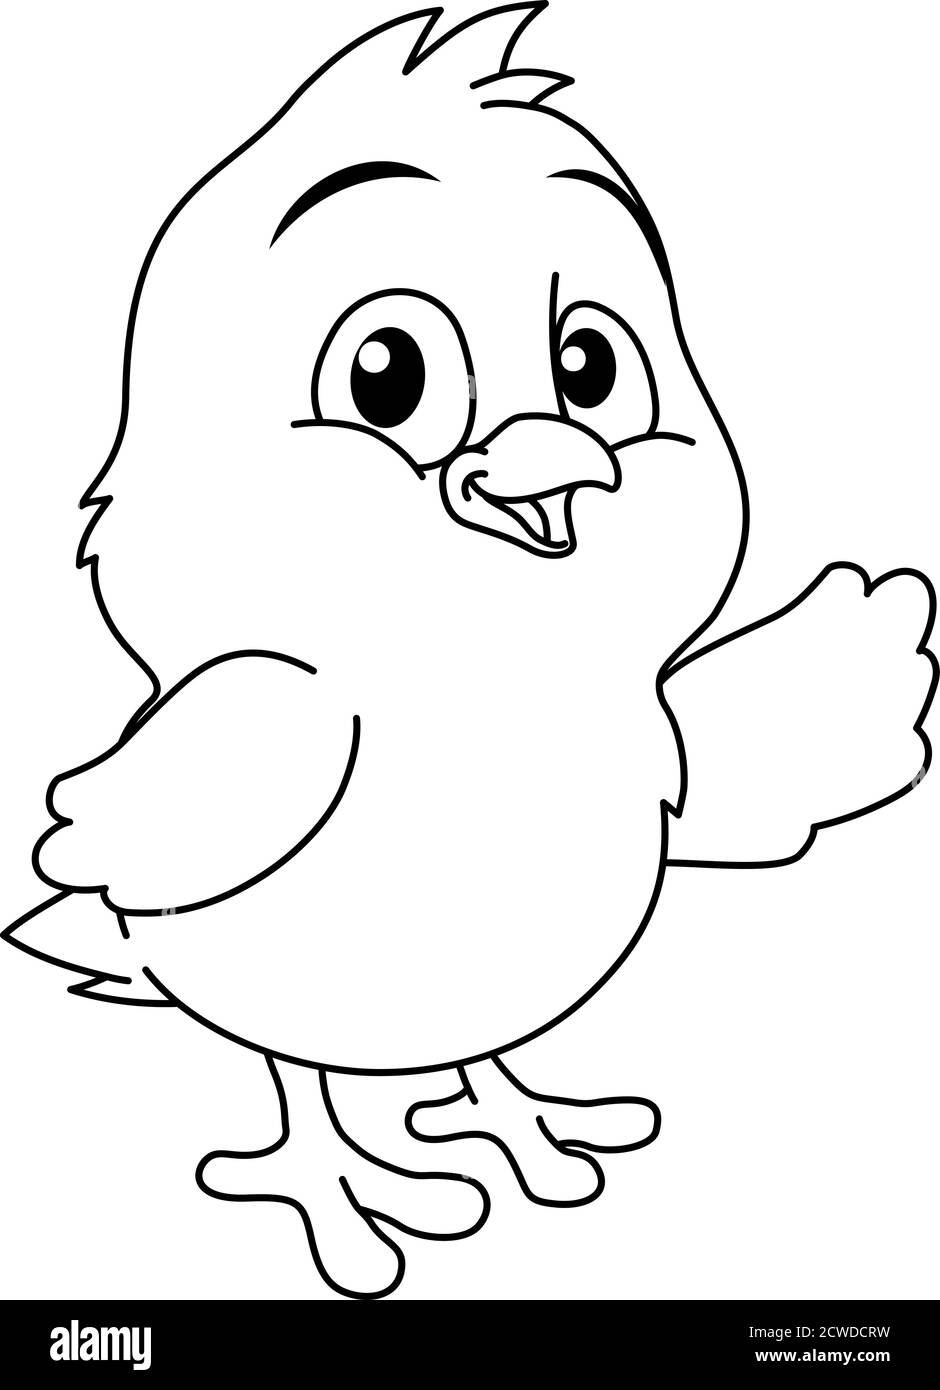 Easter Chick Coloring Book Black and White Cartoon Stock Vector